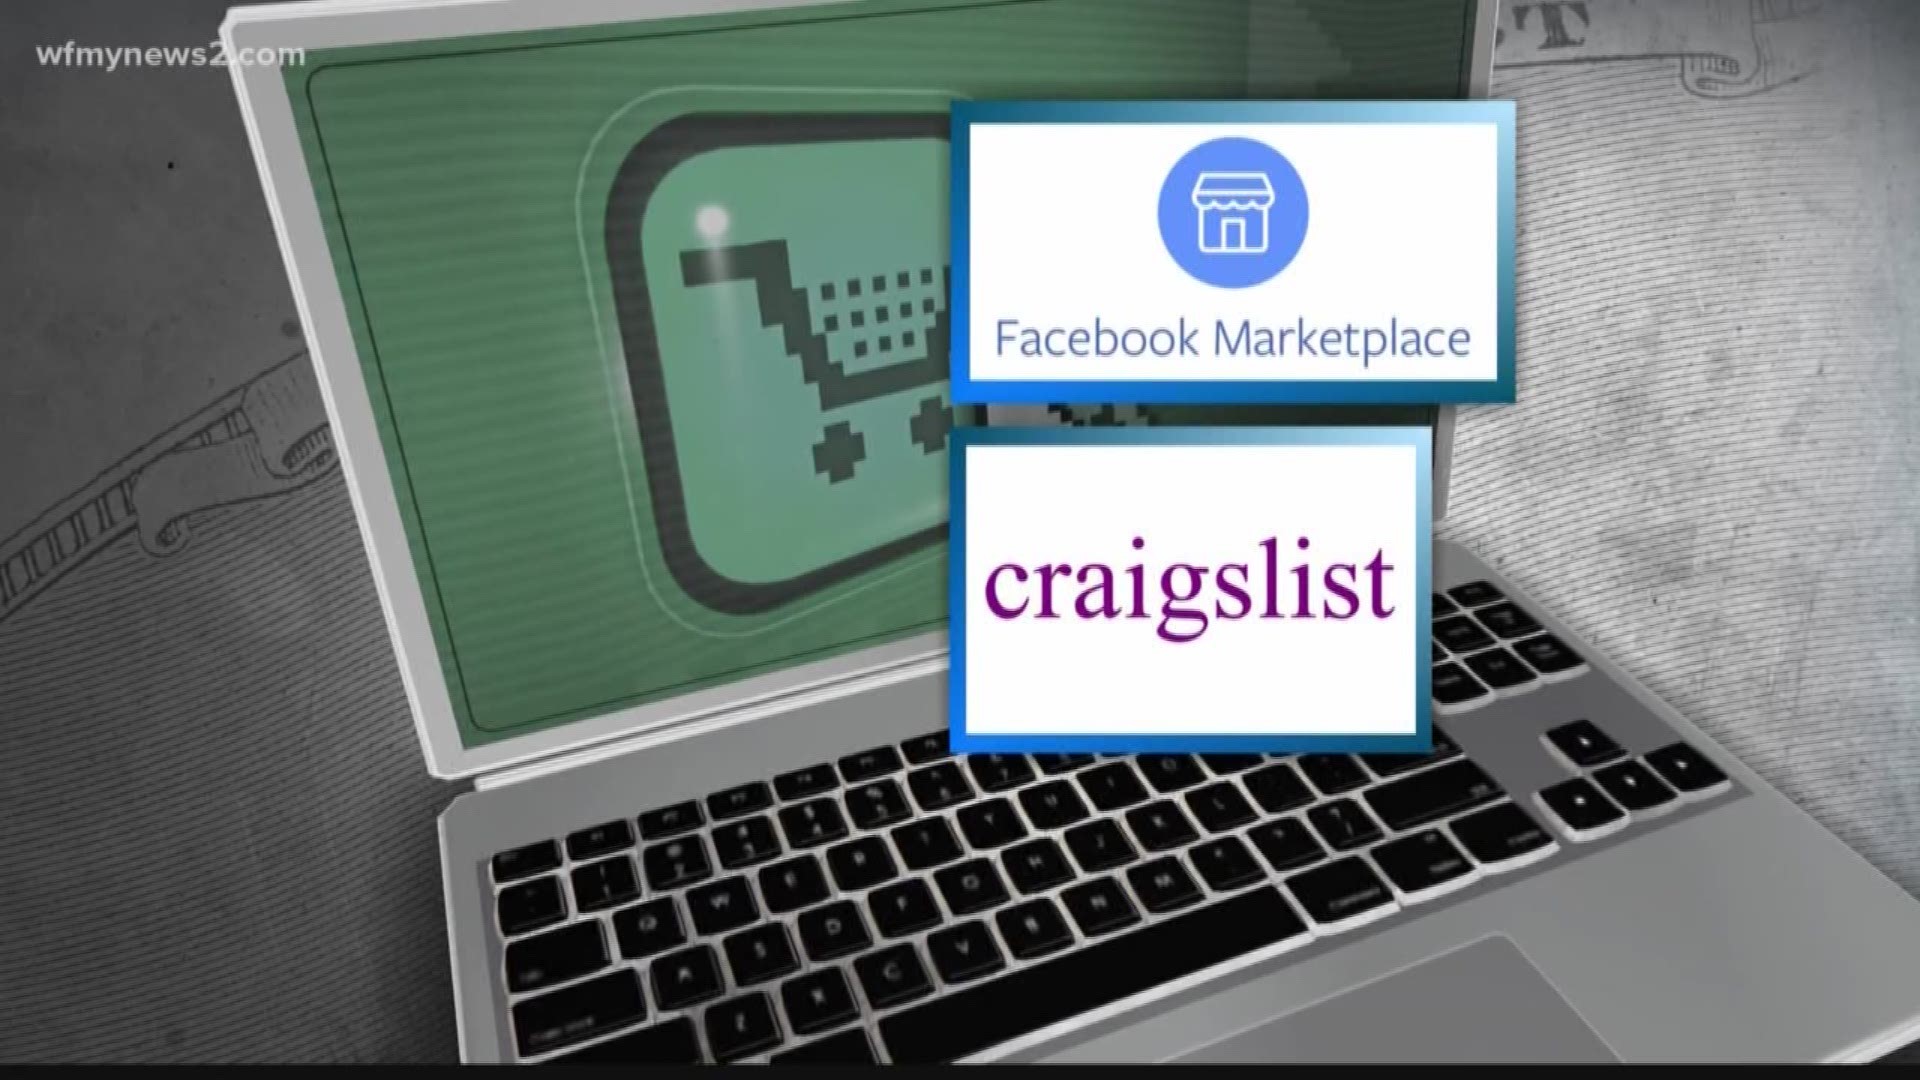 It is illegal to sell recalled products, even on Facebook market and Craigslist. But tons of products still fall through the cracks.